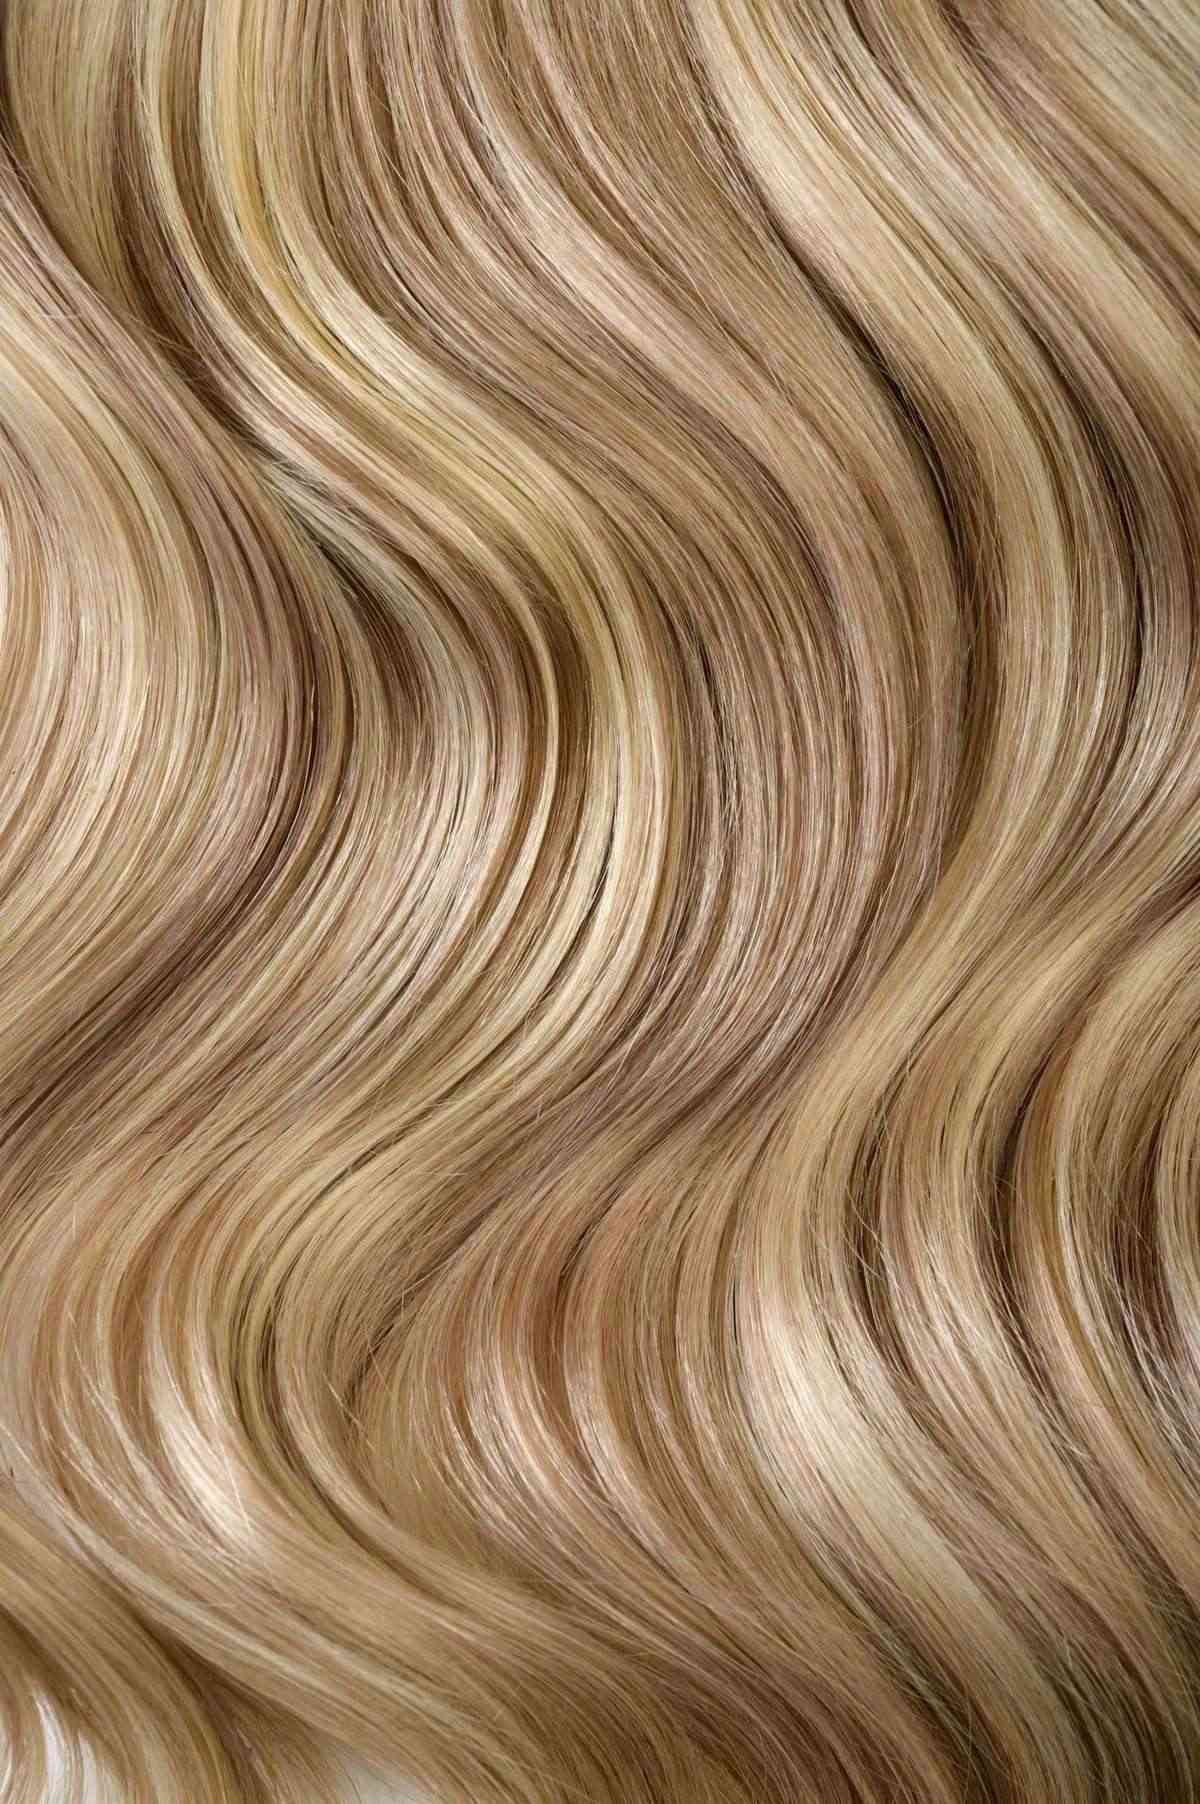 #18/613 Ash Blonde Highlights Clip In Hair Extensions 7PCS